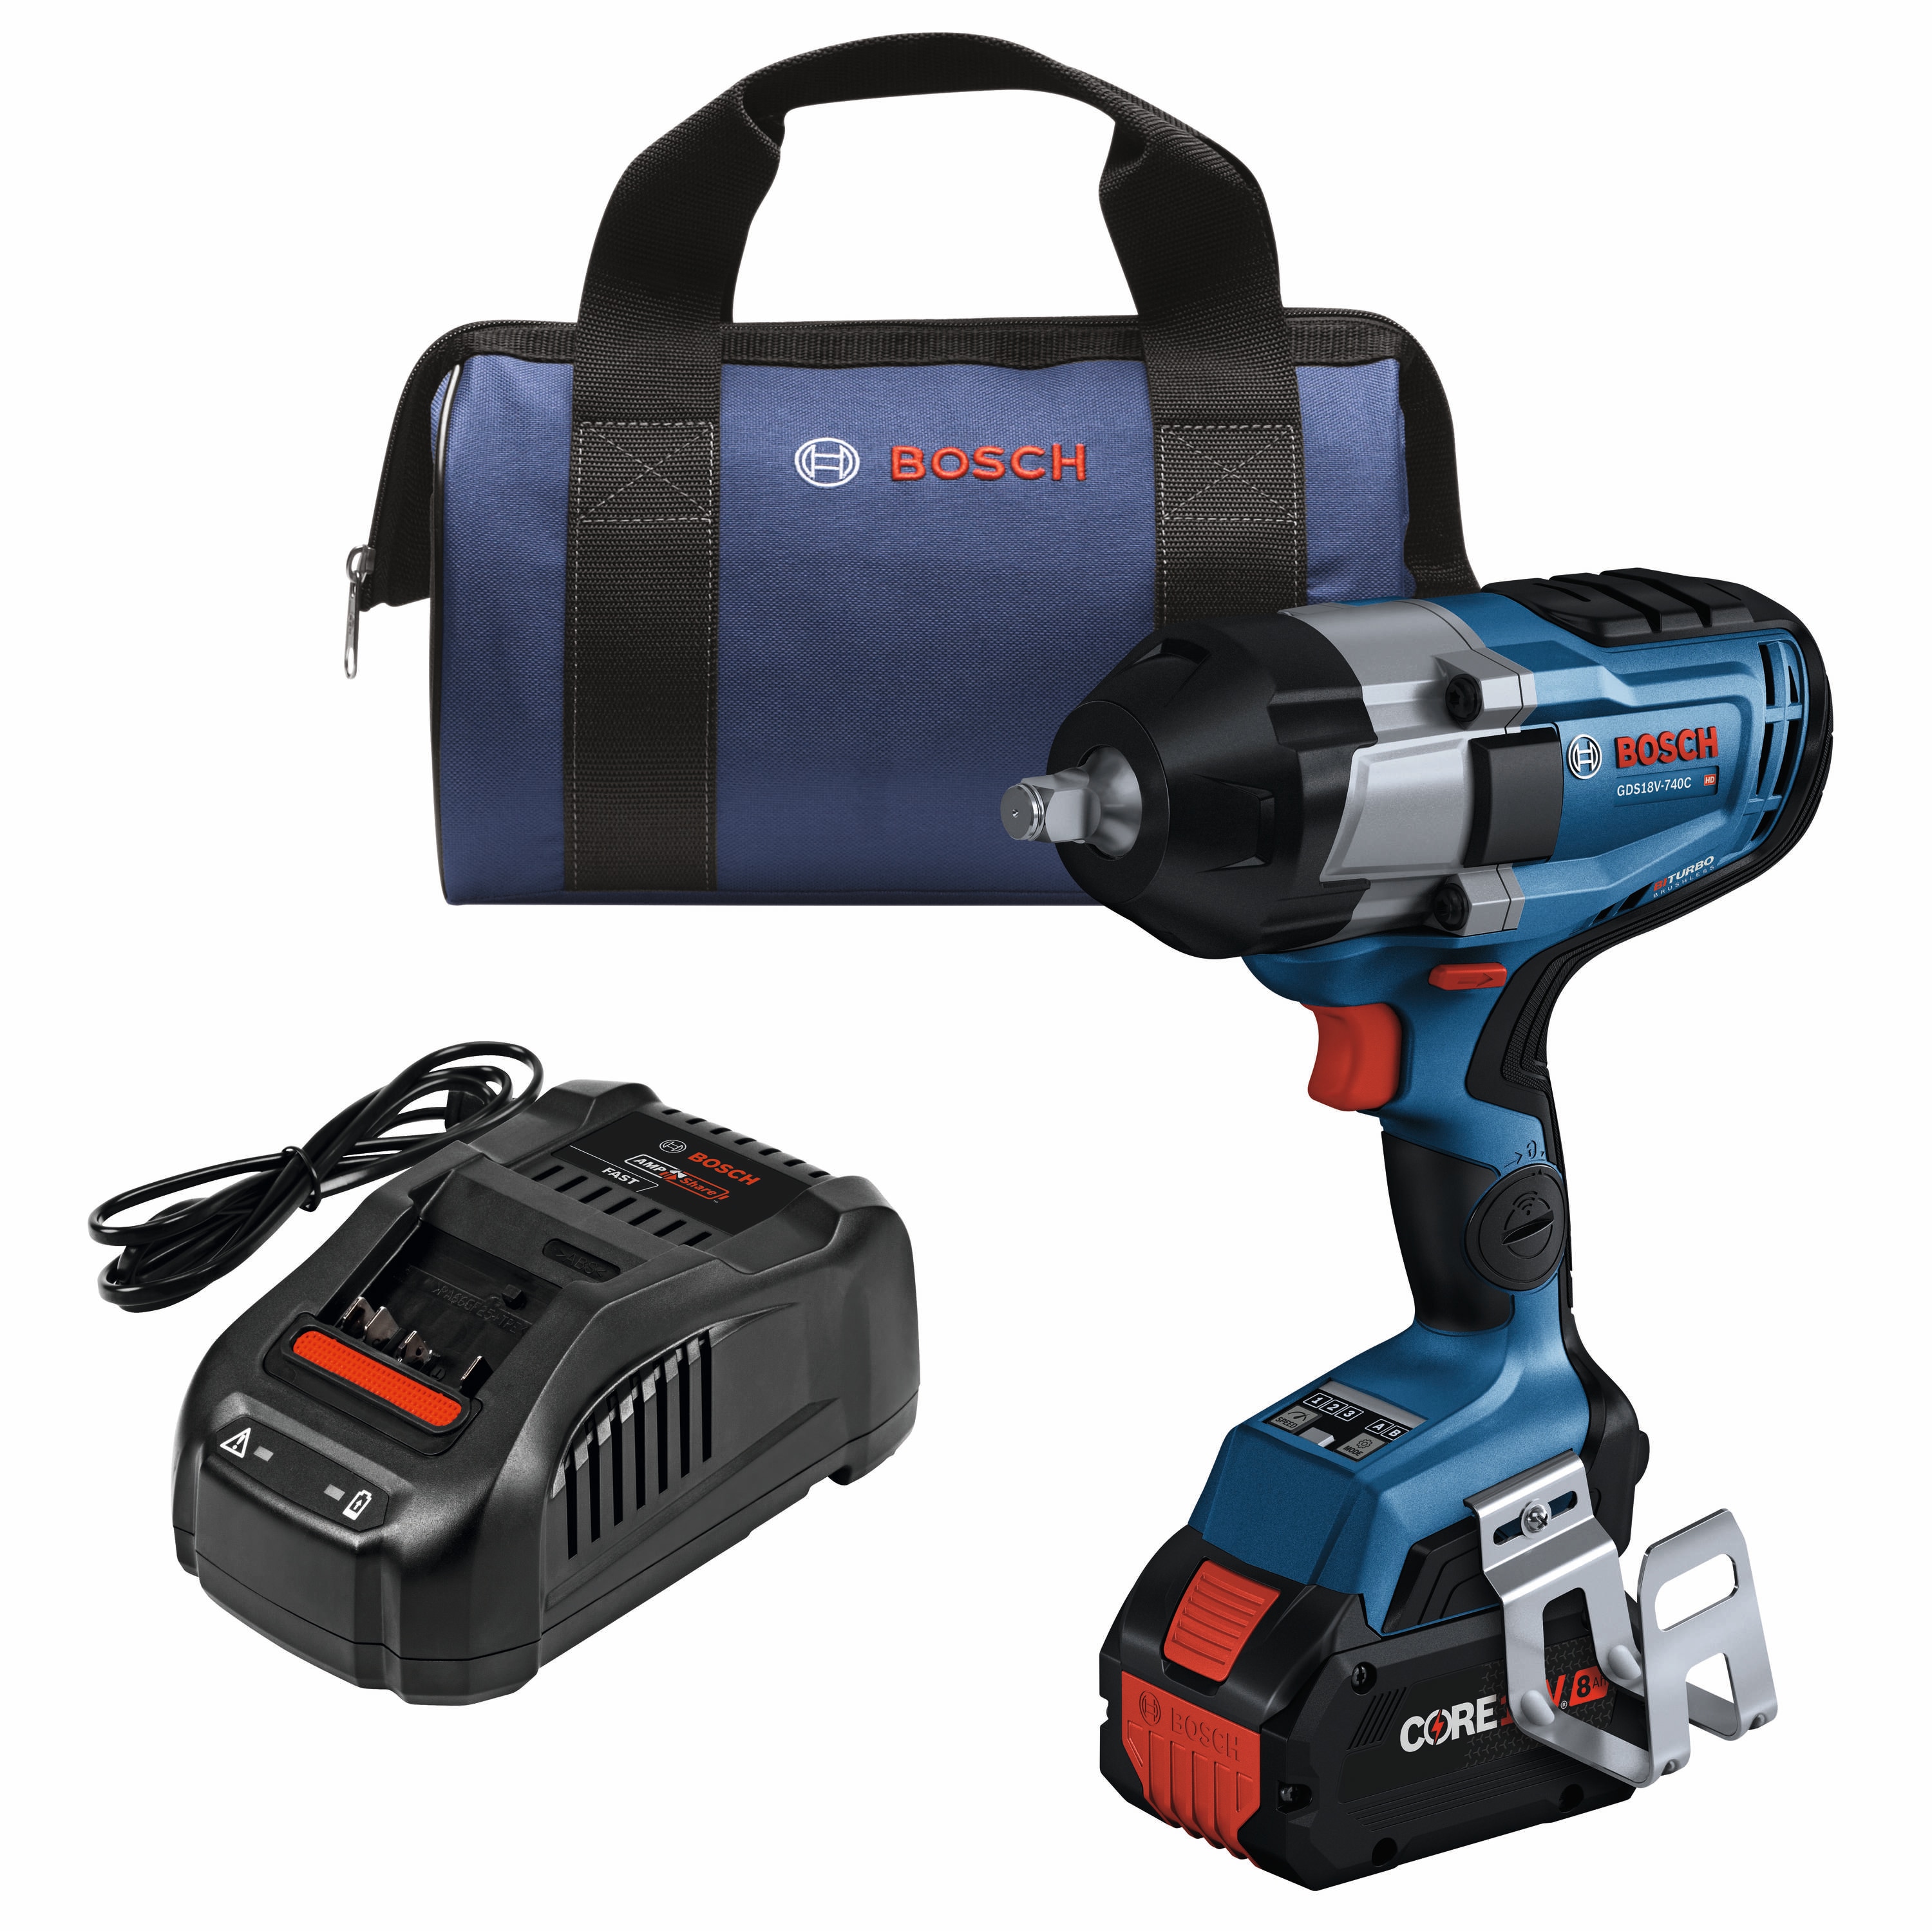 Bosch GDS 18V-210 C Cordless Impact Wrench Body Only In L-Boxx 136